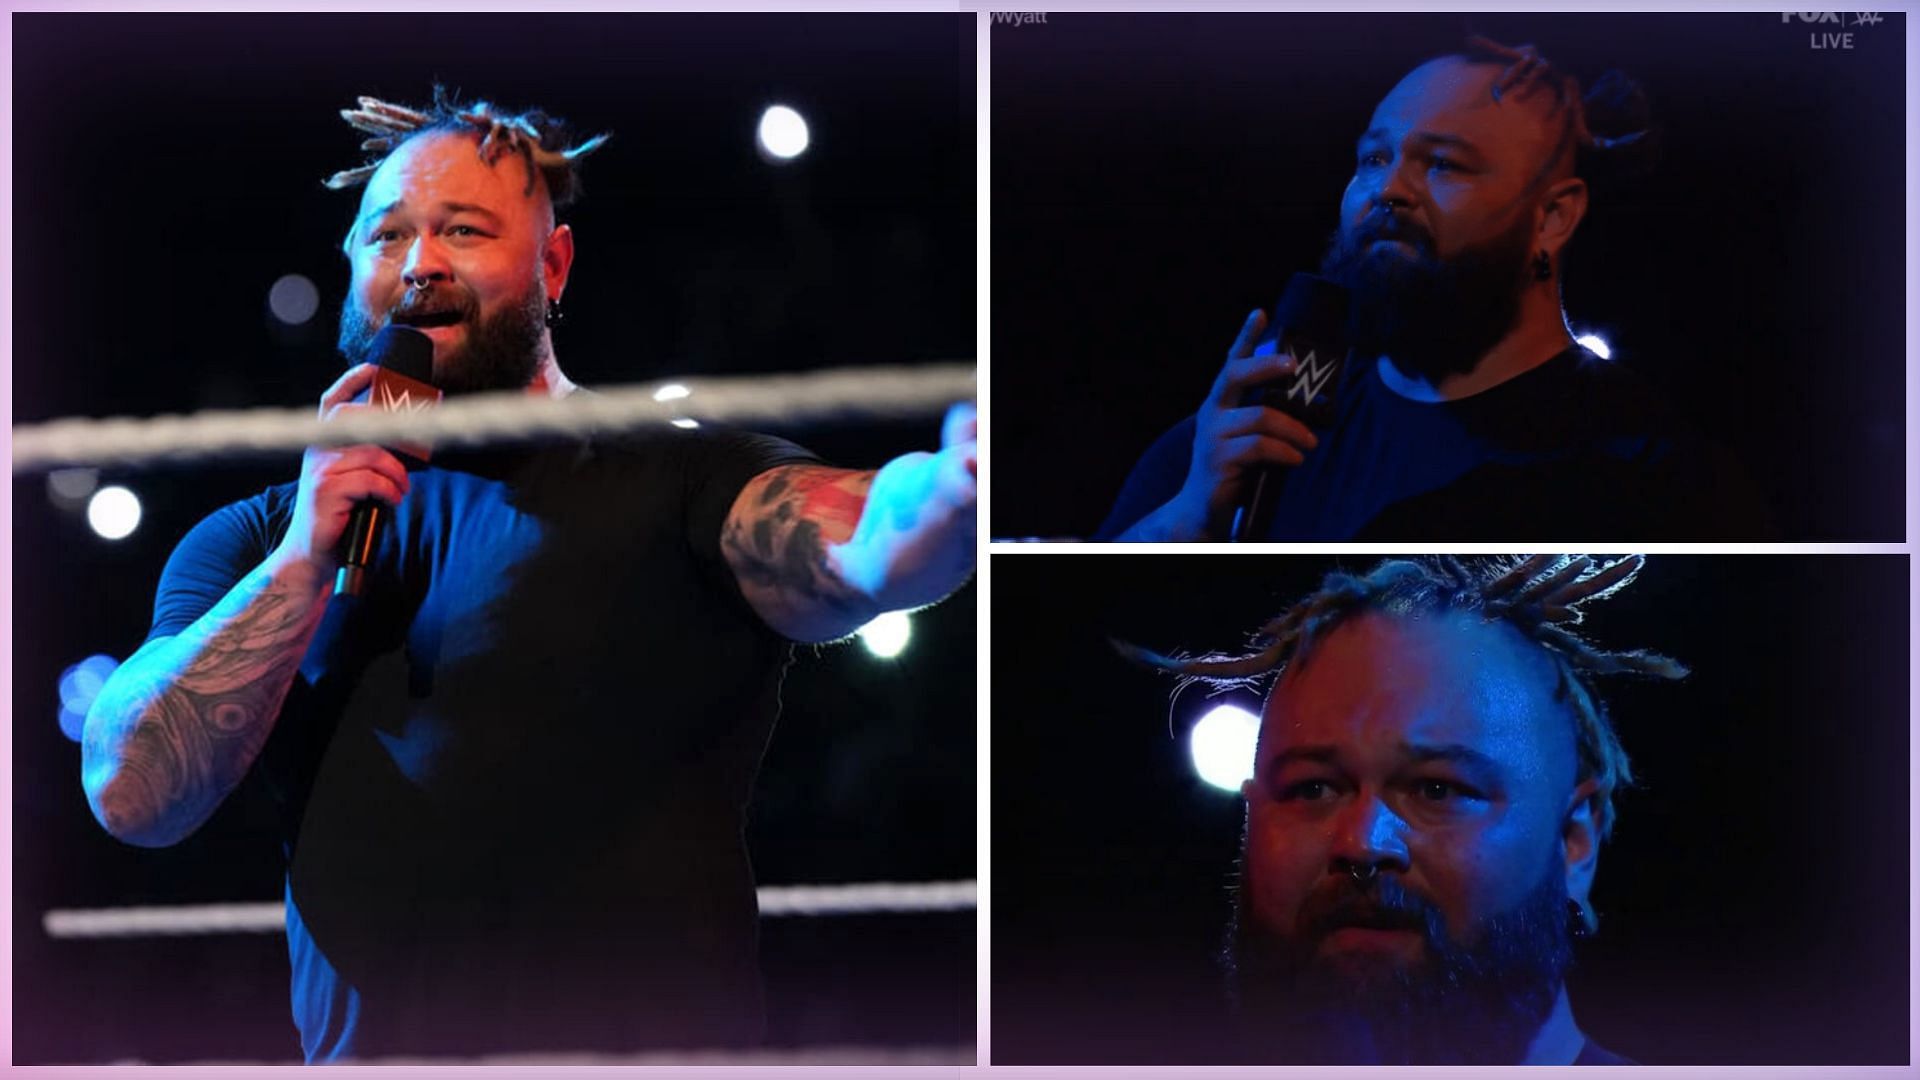 Bray Wyatt returned to WWE at Extreme Rules this year.